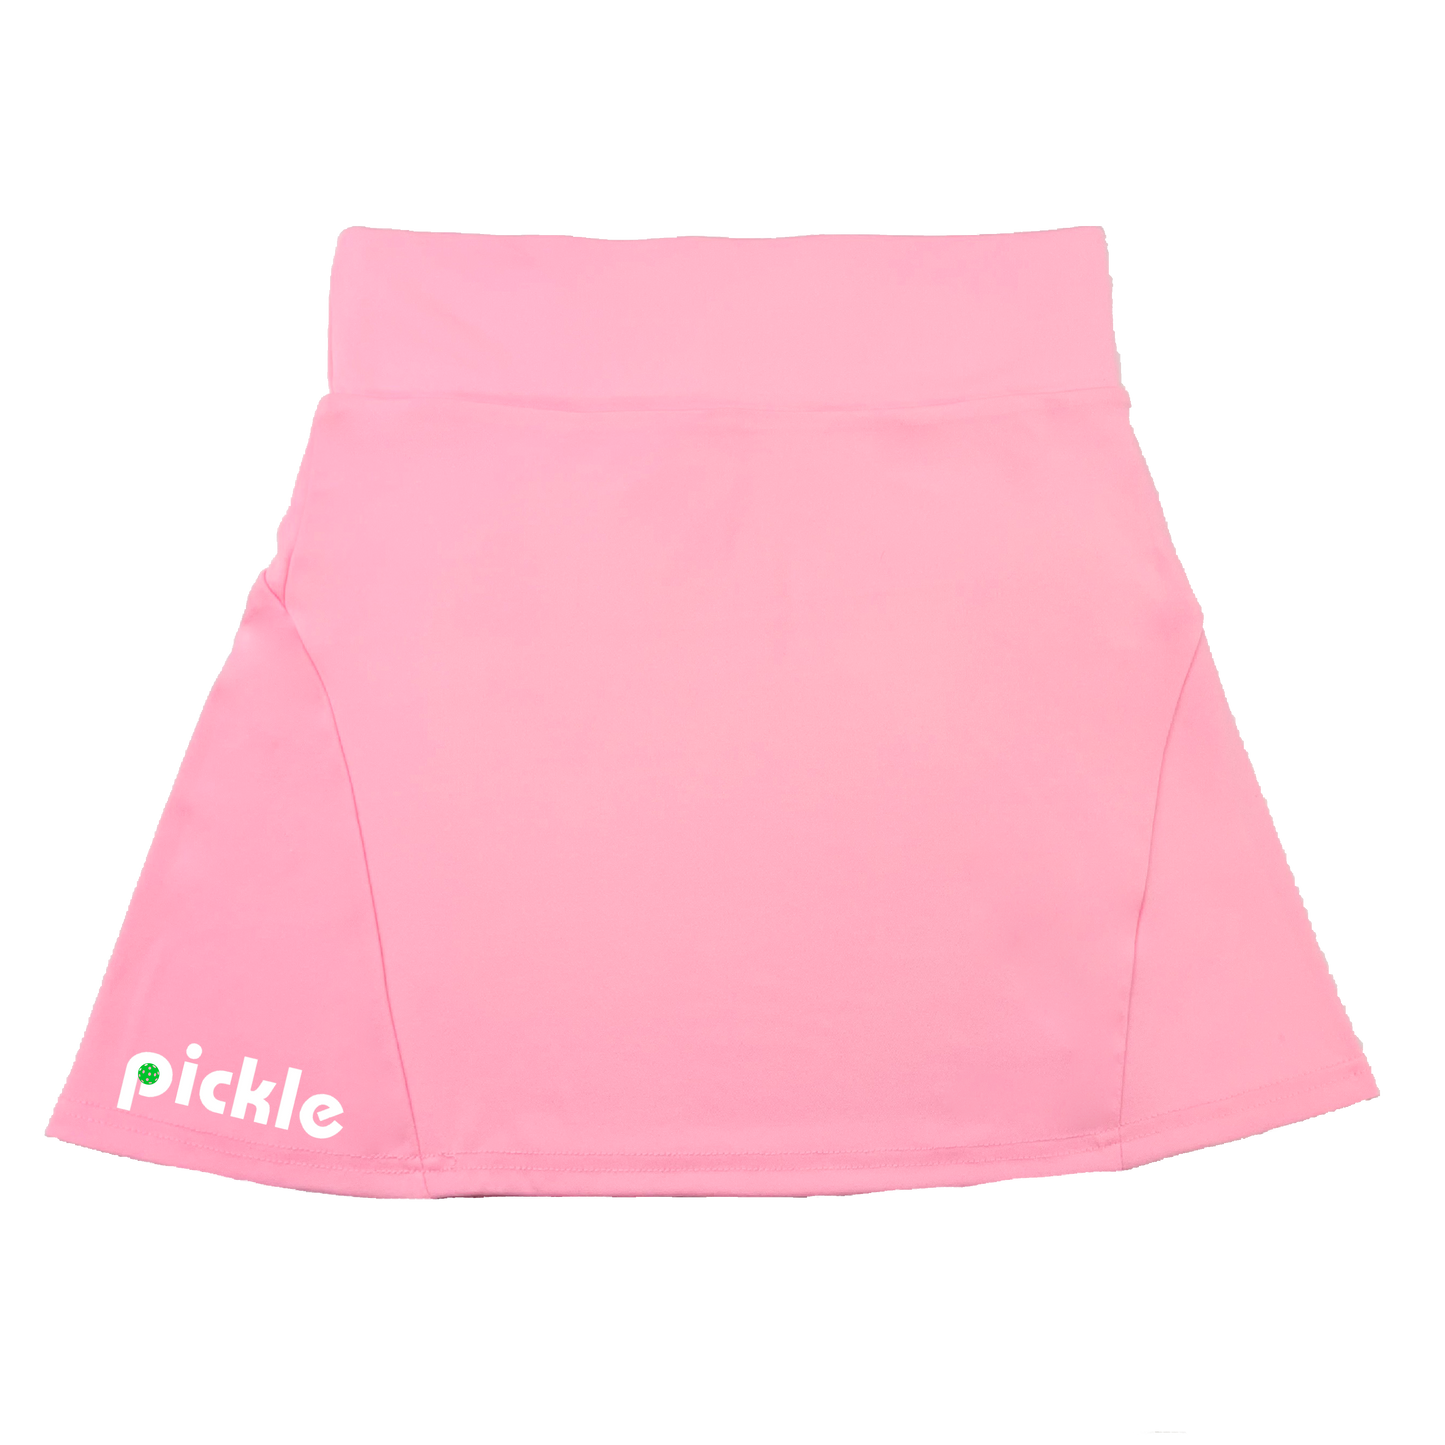 The rear pleats are what make these skorts fabulous!  Check out the pictures to see for yourself.  The pleats are evenly spaced to give a fun flirty look.  Great skorts for the serious pickballer! 